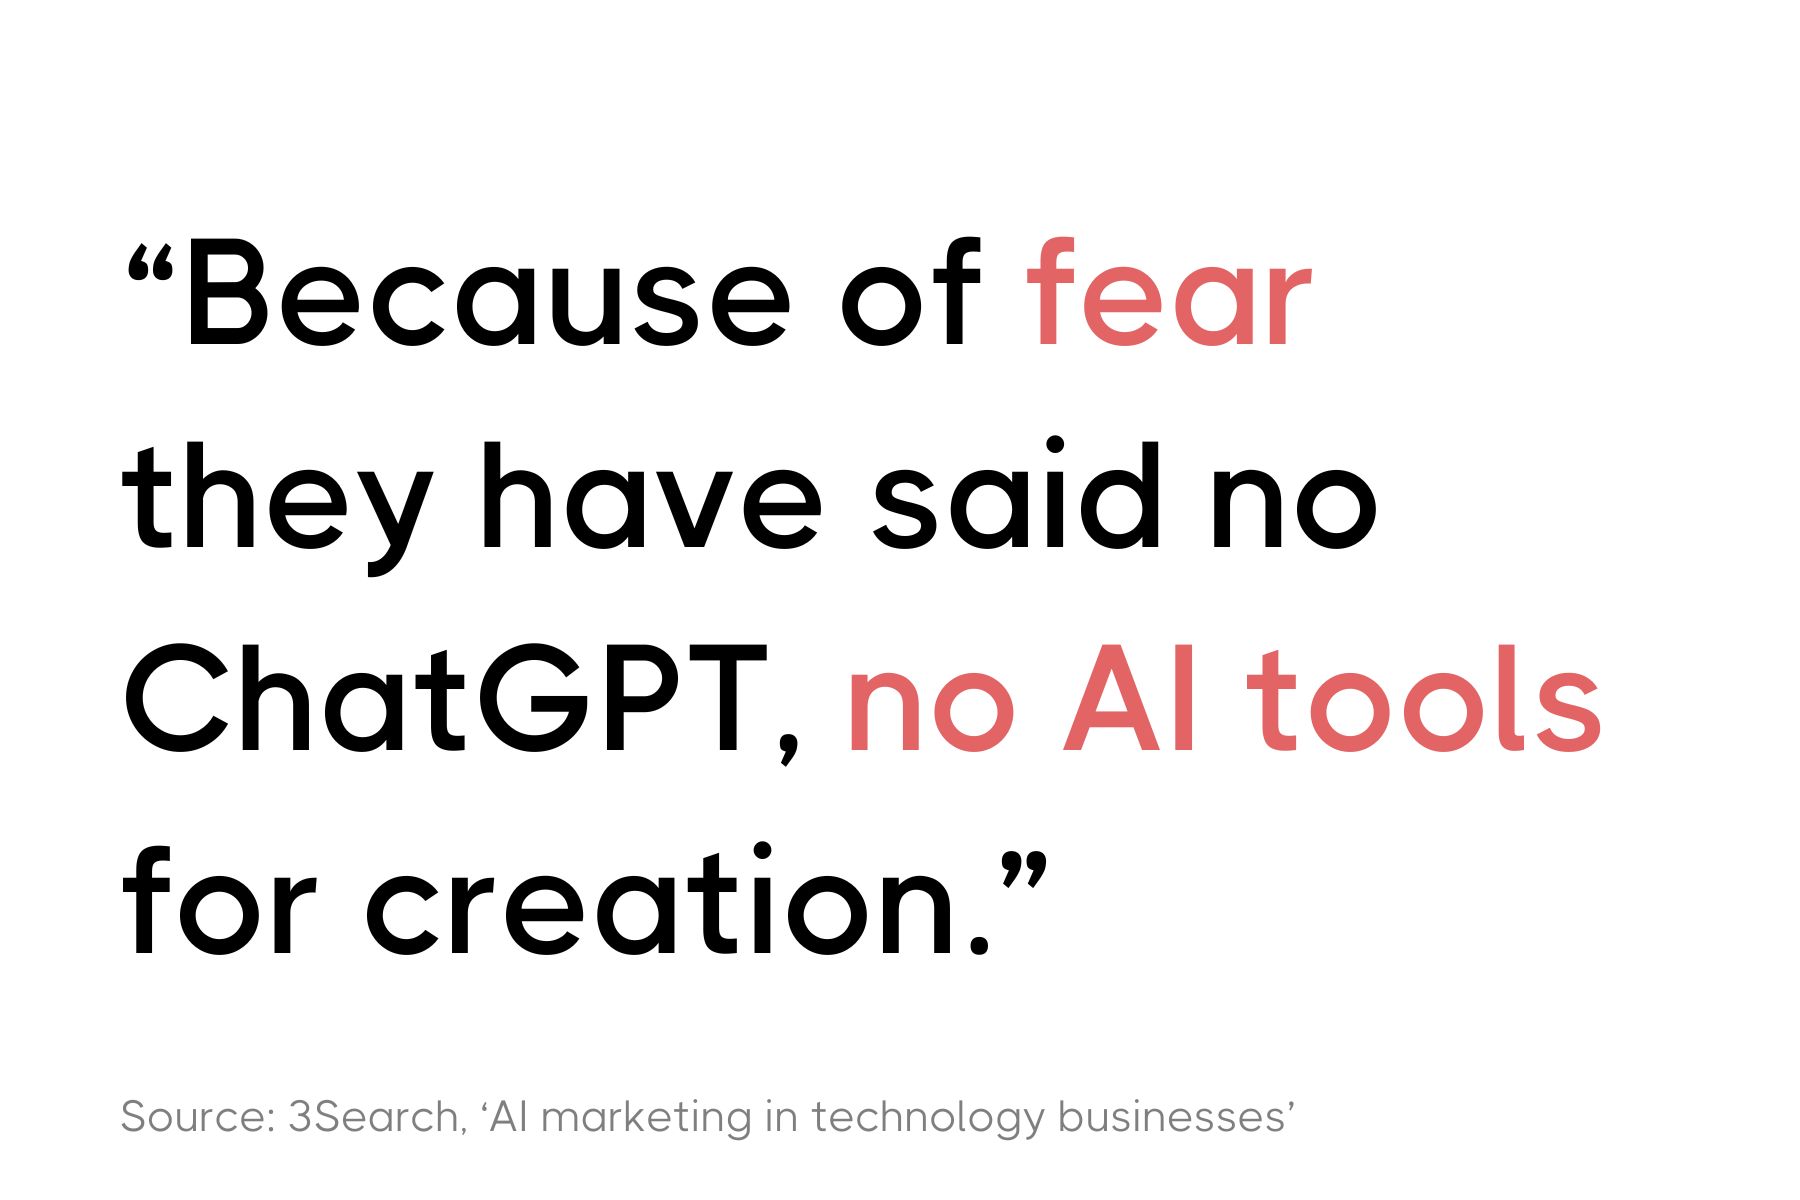 A graphic featuring the quote "Because of fear they have said no ChatGPT, no AI tools for creation." in red and black text. Cited from a source titled 'AI marketing in technology businesses' by 3Search.